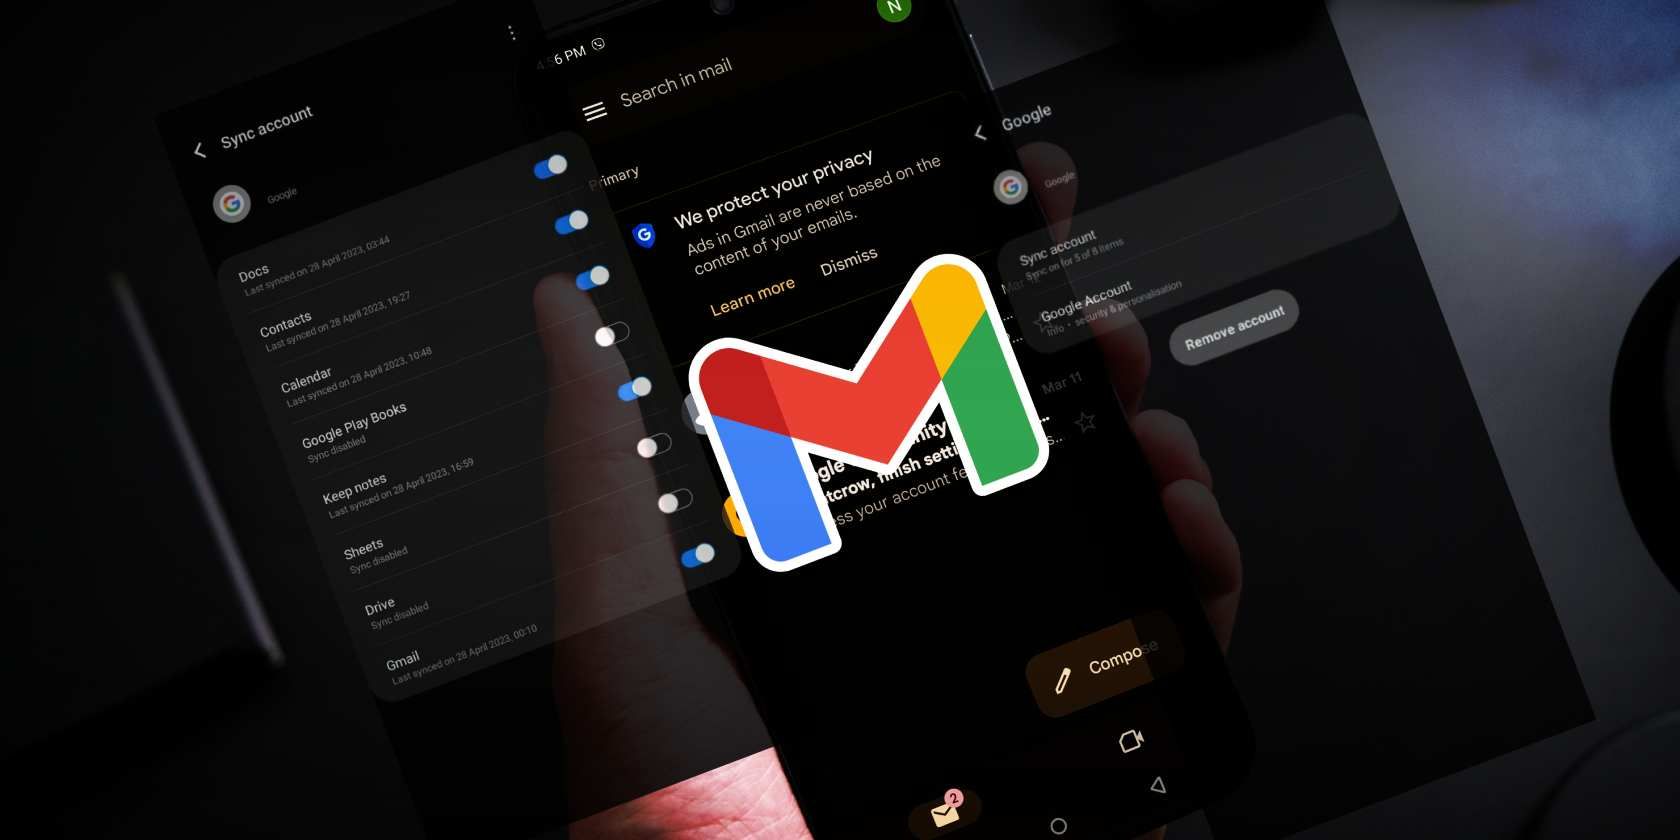 A phone with a gmail interface and a gmail logo